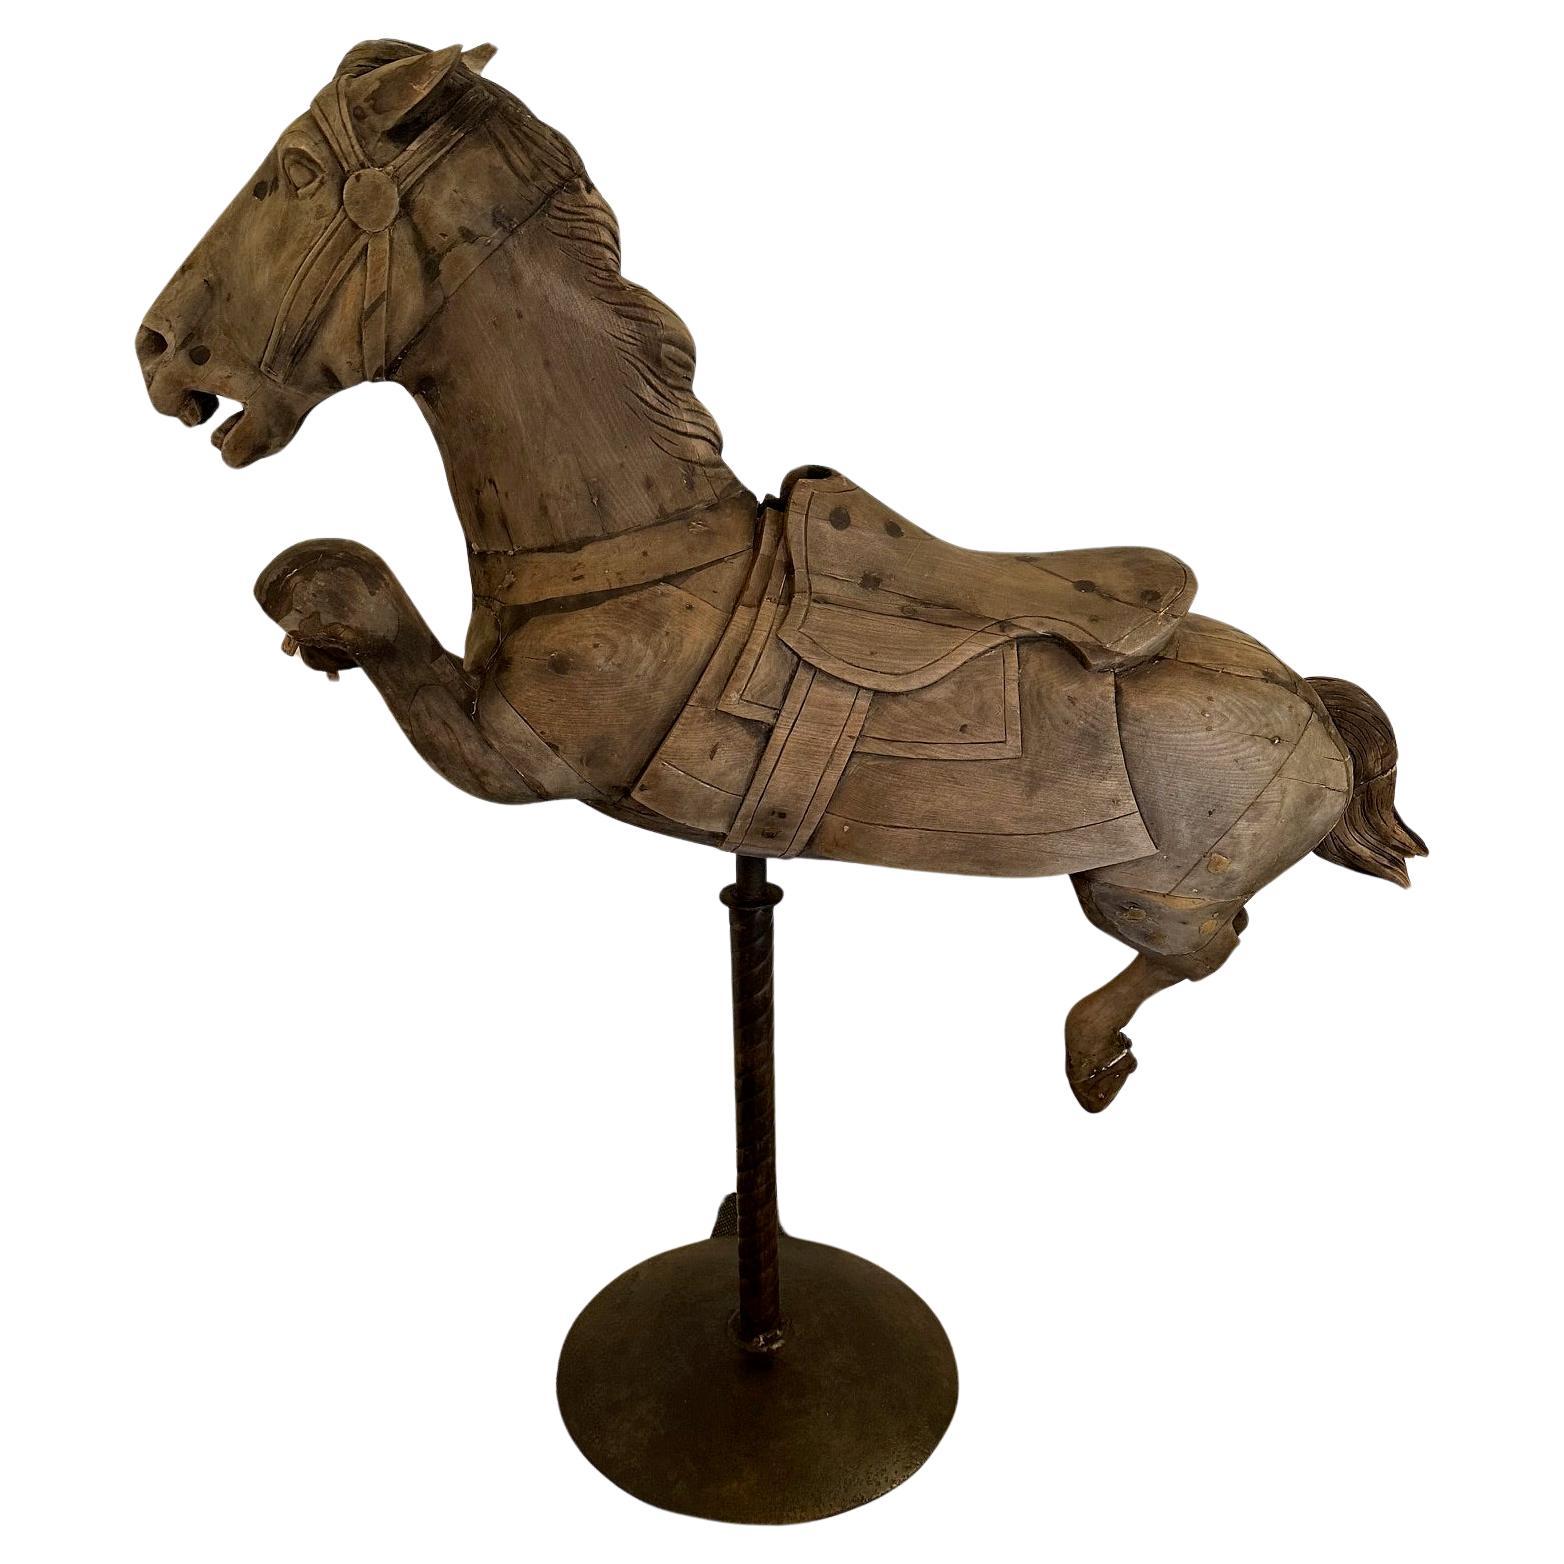 Rare Antique Distressed Carousel Horse on Iron Stand Sculpture